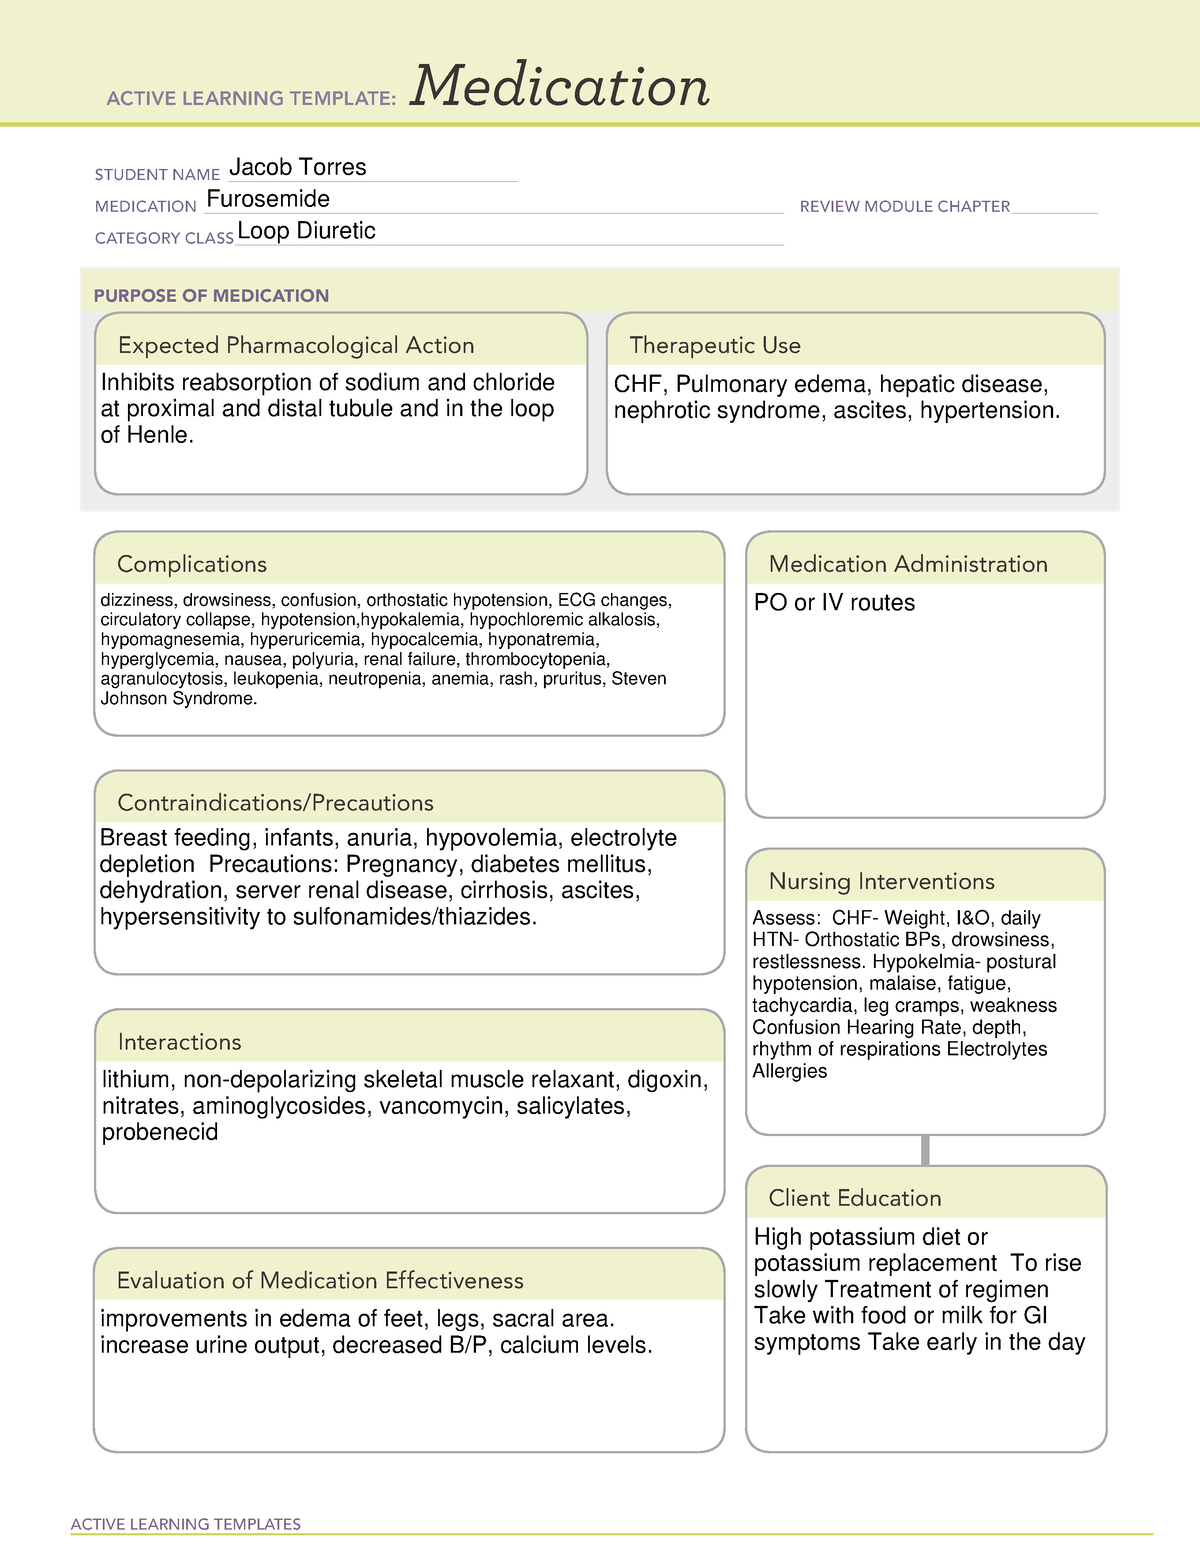 furosemide-medication-template-active-learning-templates-therapeutic